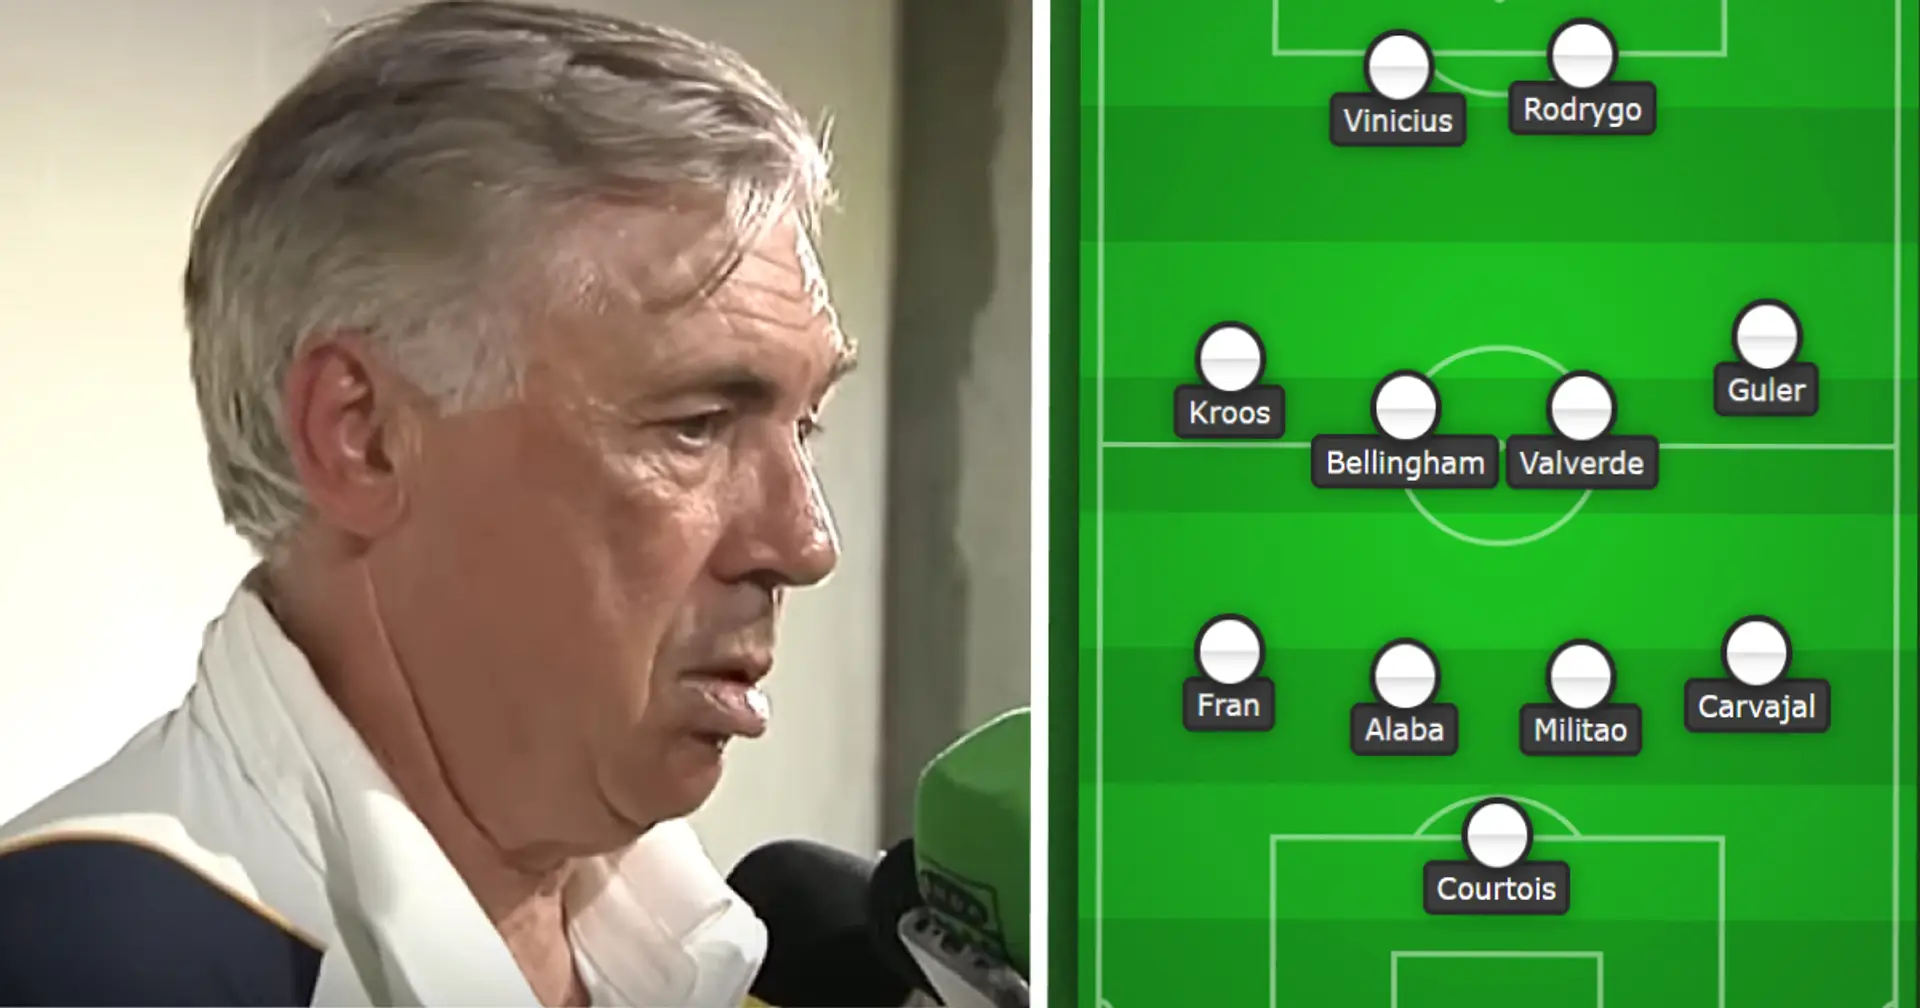 Carlo Ancelotti says he will change 4-4-2 formation on one condition